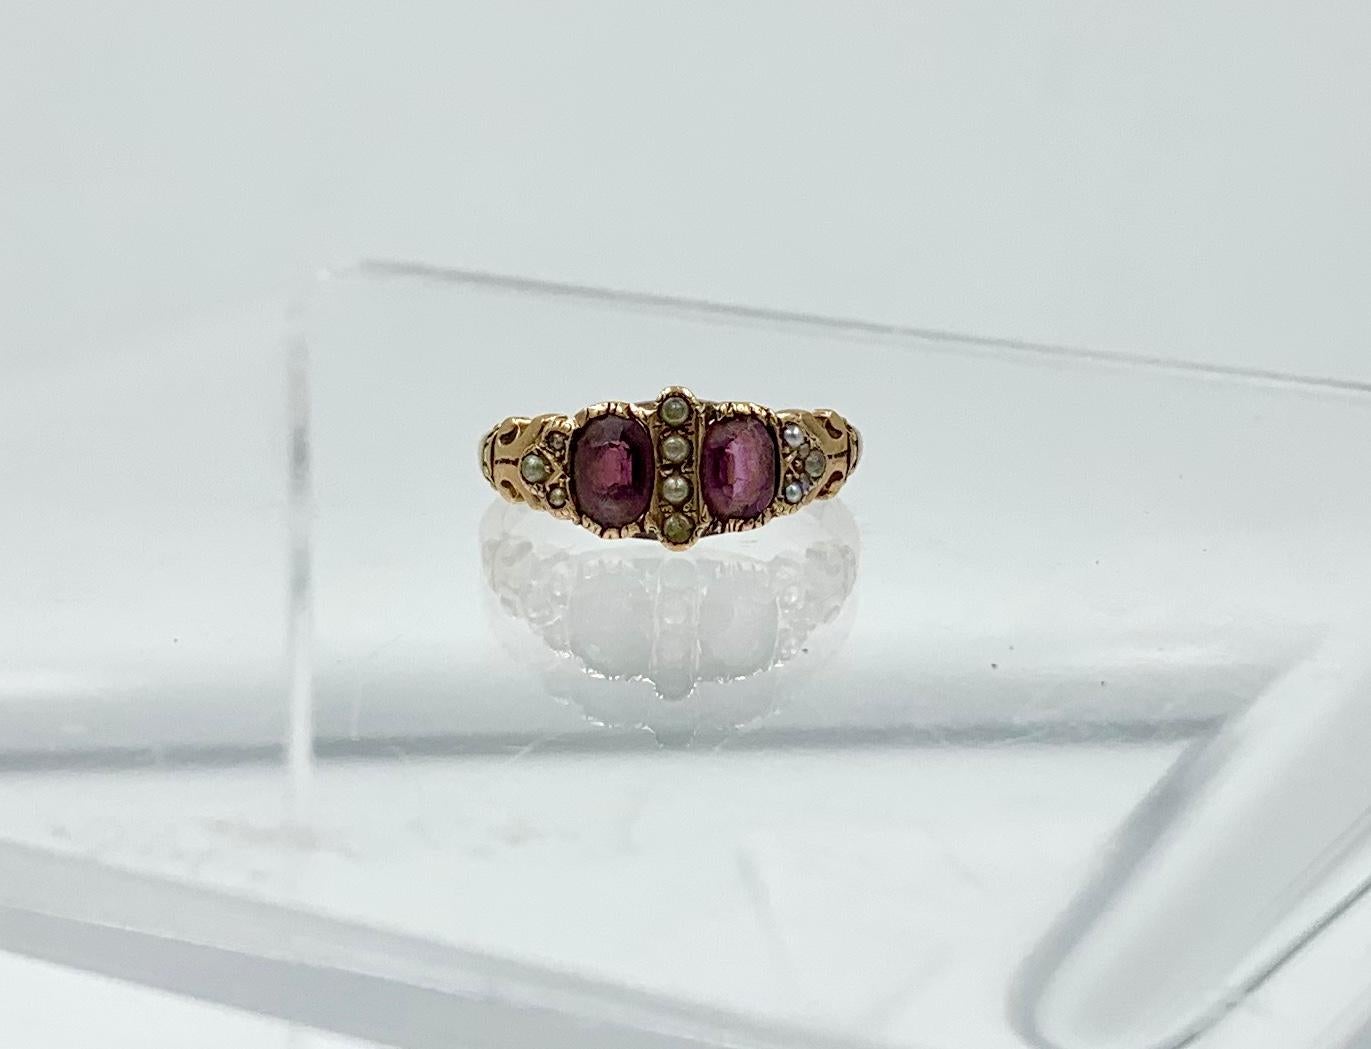 This is an Antique Victorian - Edwardian Ring with two gorgeous natural oval faceted Bohemian Garnets of stunning beauty. The Garnet gems are accented by Seed Pearls.   The jewels are set in a gorgeous engraved scroll motif setting in 10 Karat Rose